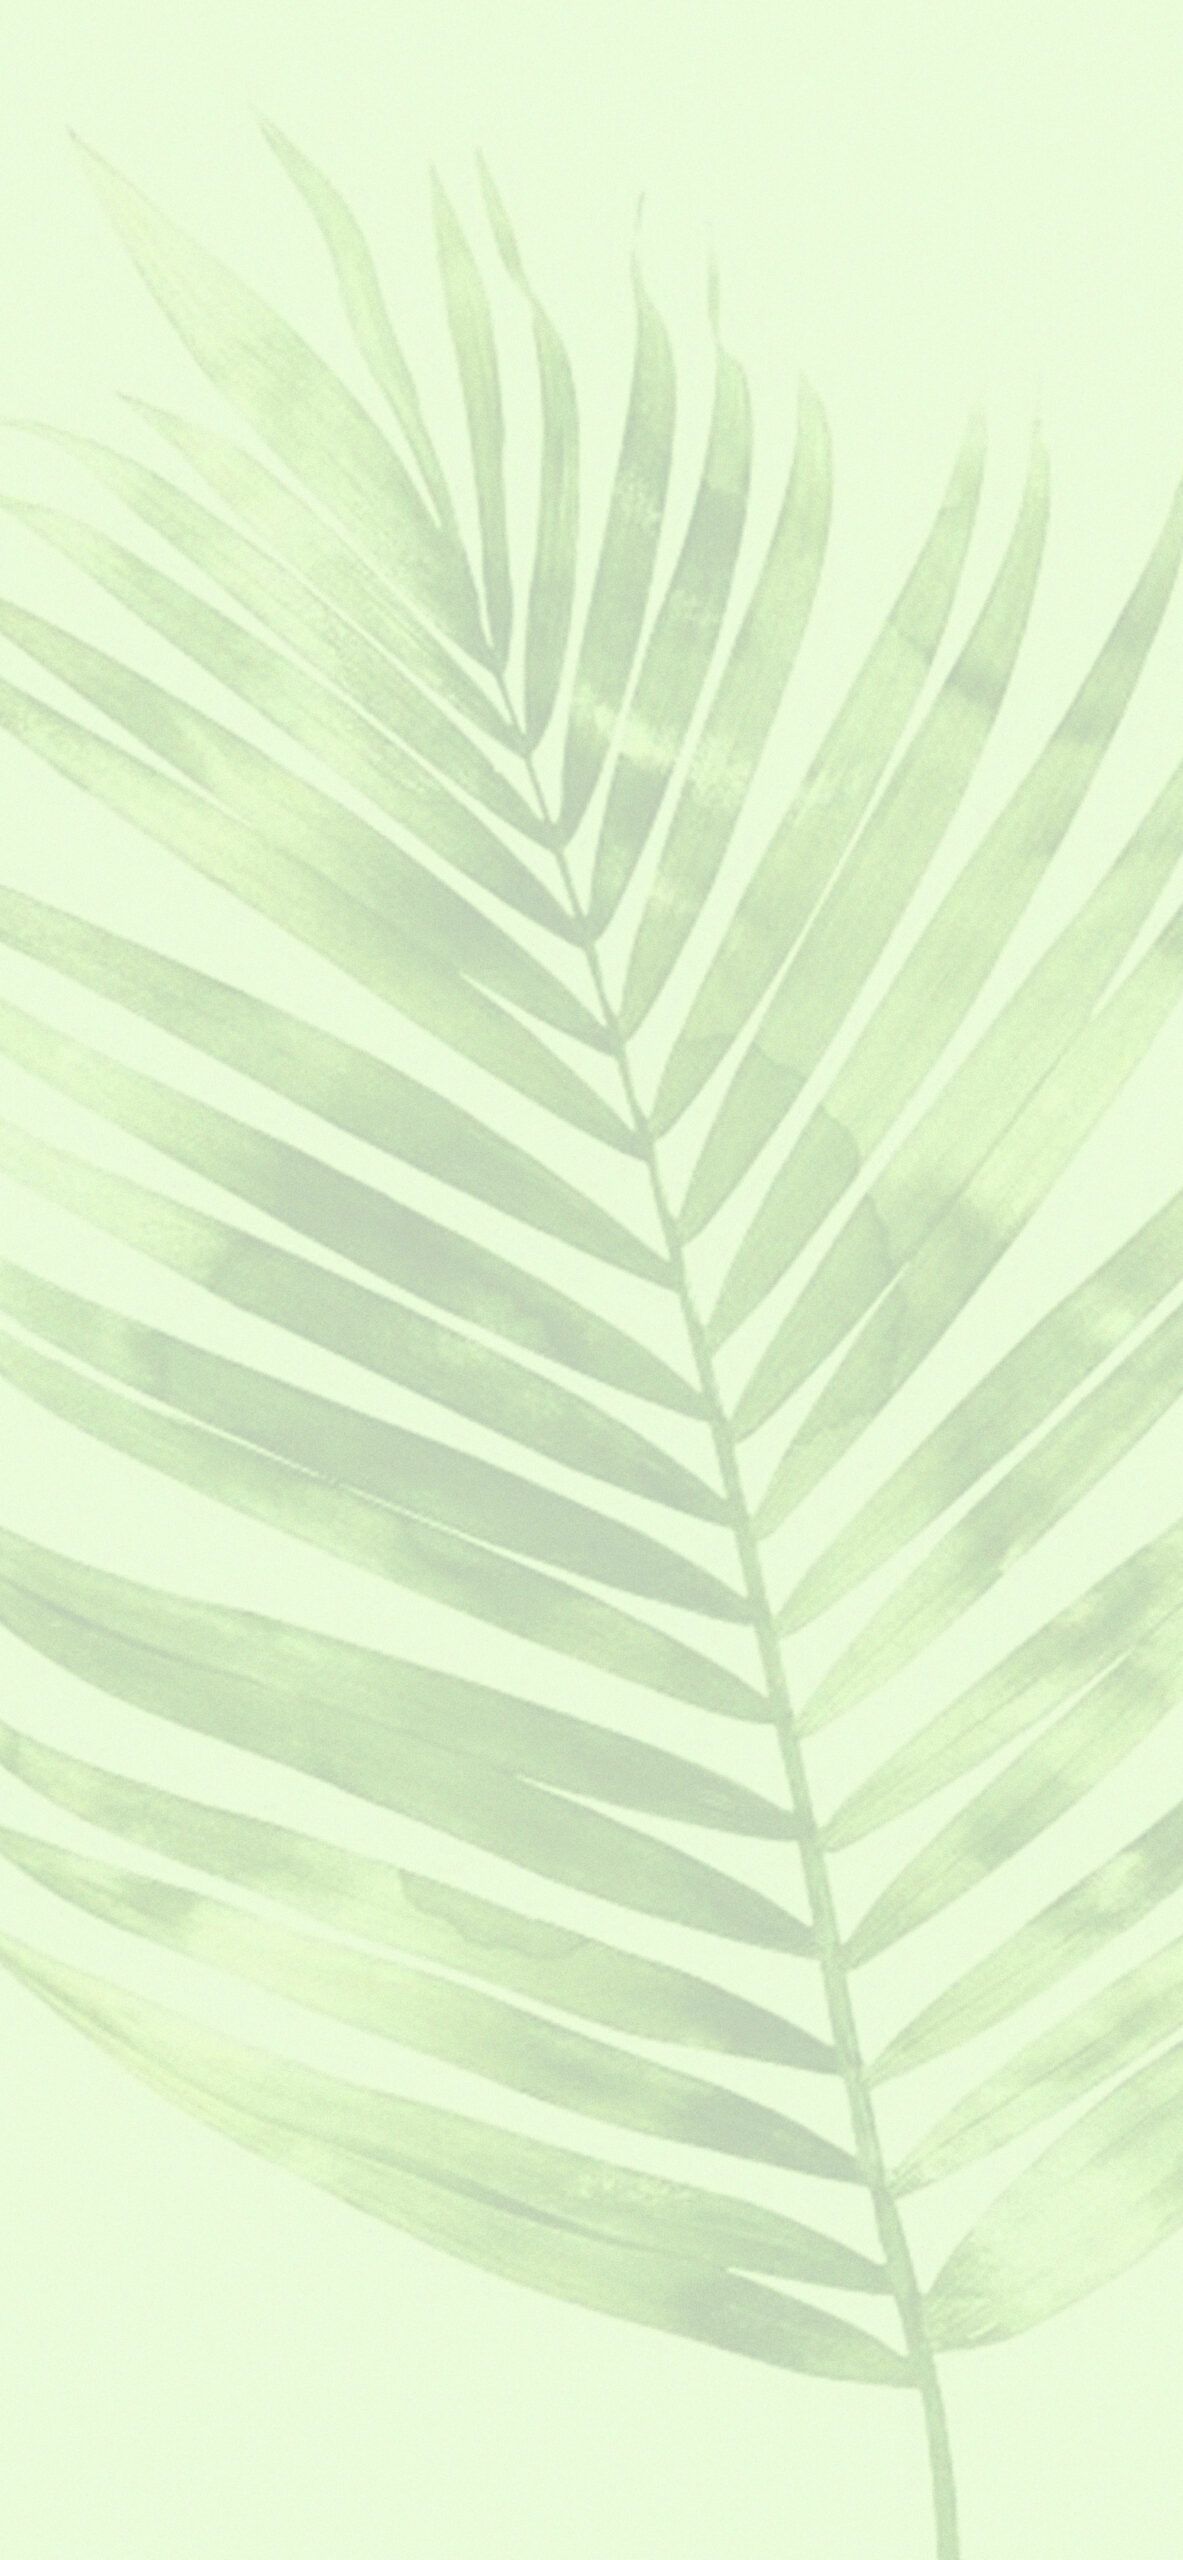 A palm leaf painted in a pastel green color. - Soft green, green, light green, pastel green